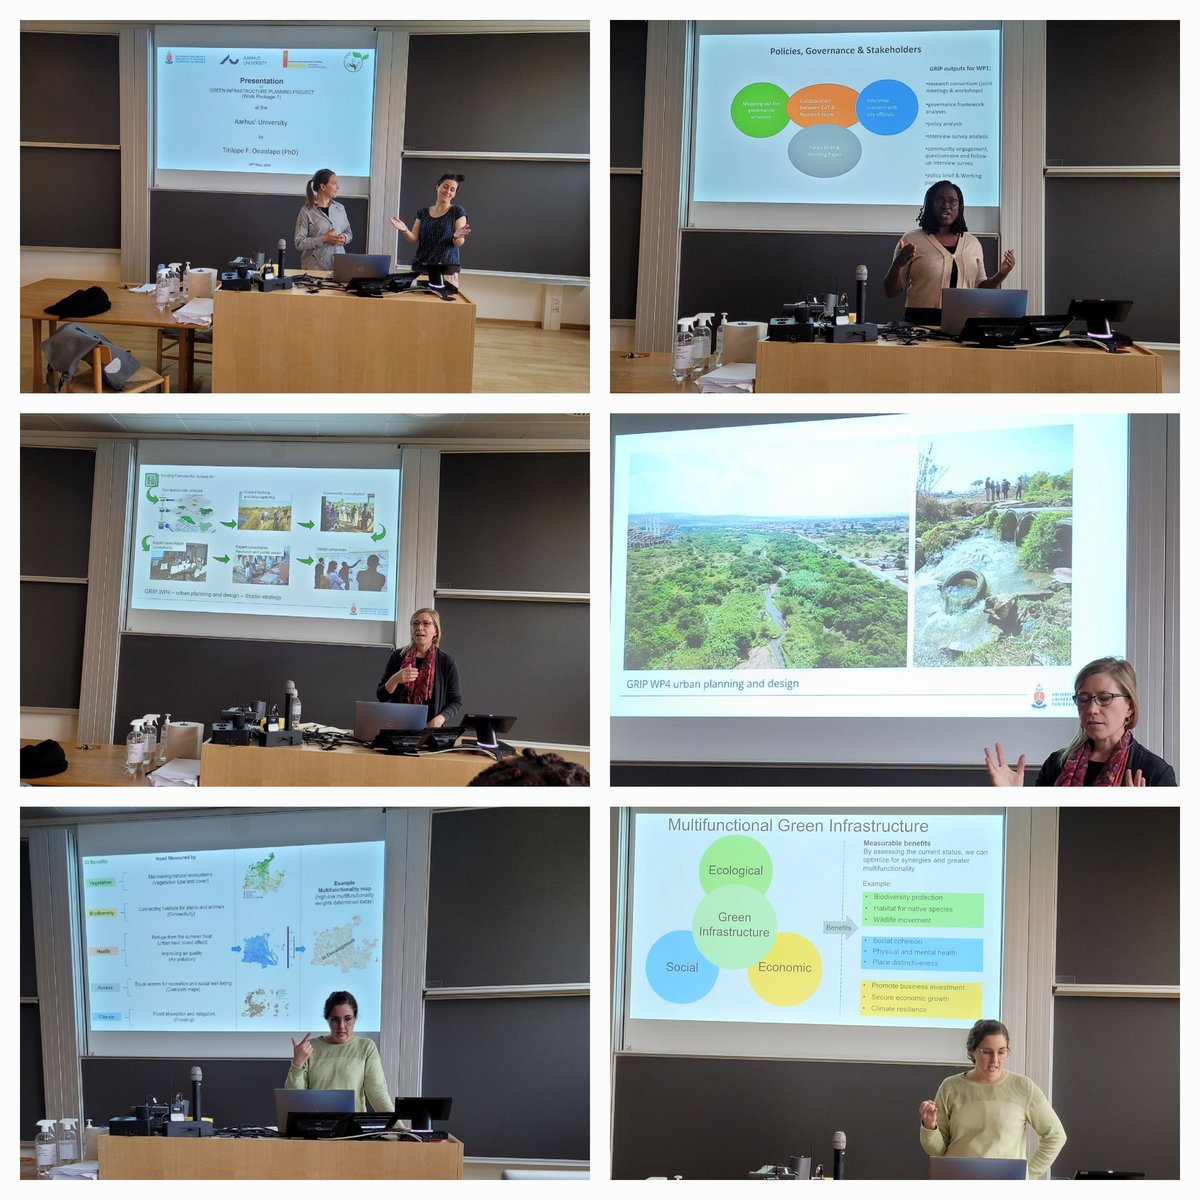 Exciting to hear updates from the South African partners of the Integrative Green Infrastructure Planning (GRIP) project currently visiting @AarhusUni & the local PIs Maya Pasgaard, @KristineEngeman, @JCSvenning. #greeninfrastructure #urbangreen #sustainablecity #ecologicaldesign